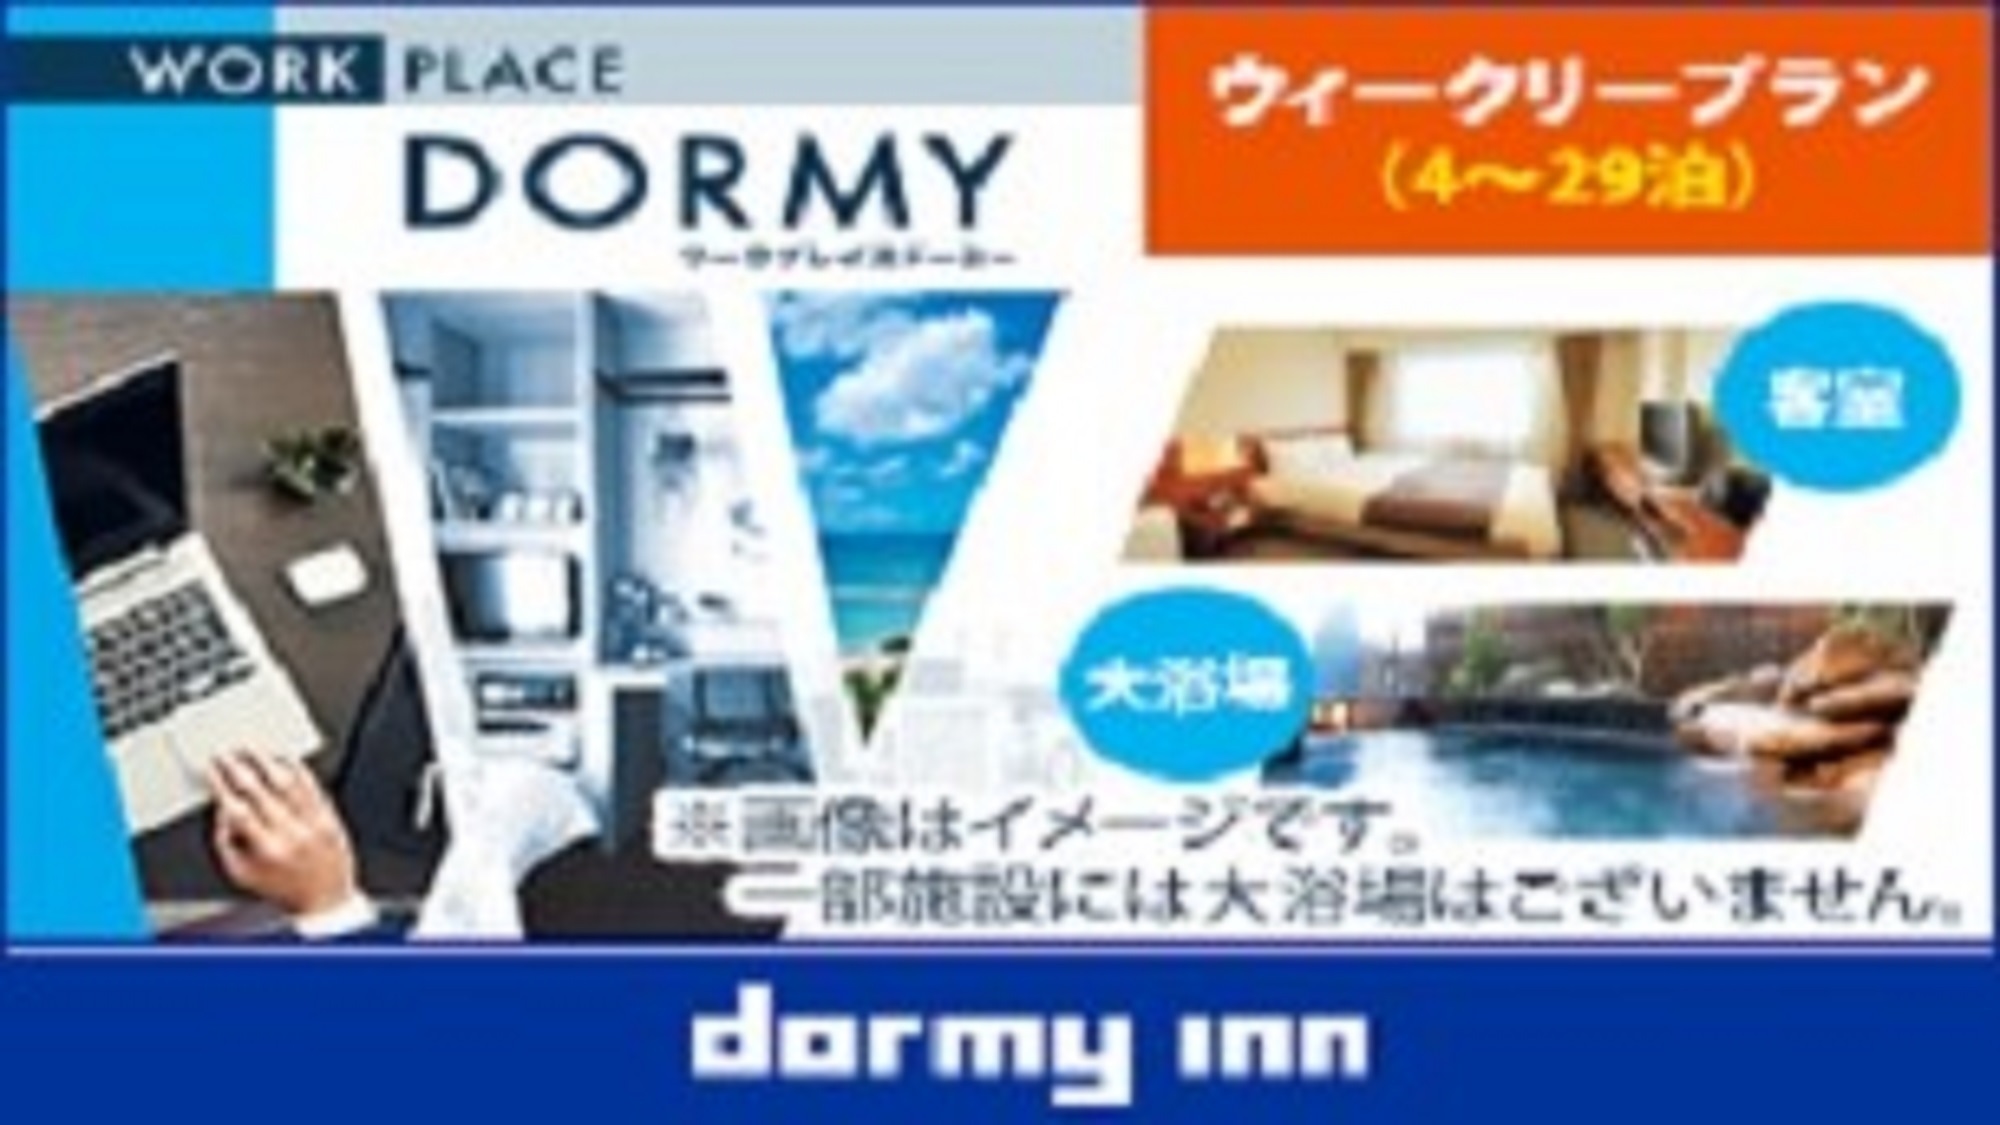 【WORK PLACE DORMY】 ウィークリープラン（4〜29泊）≪朝食付き≫